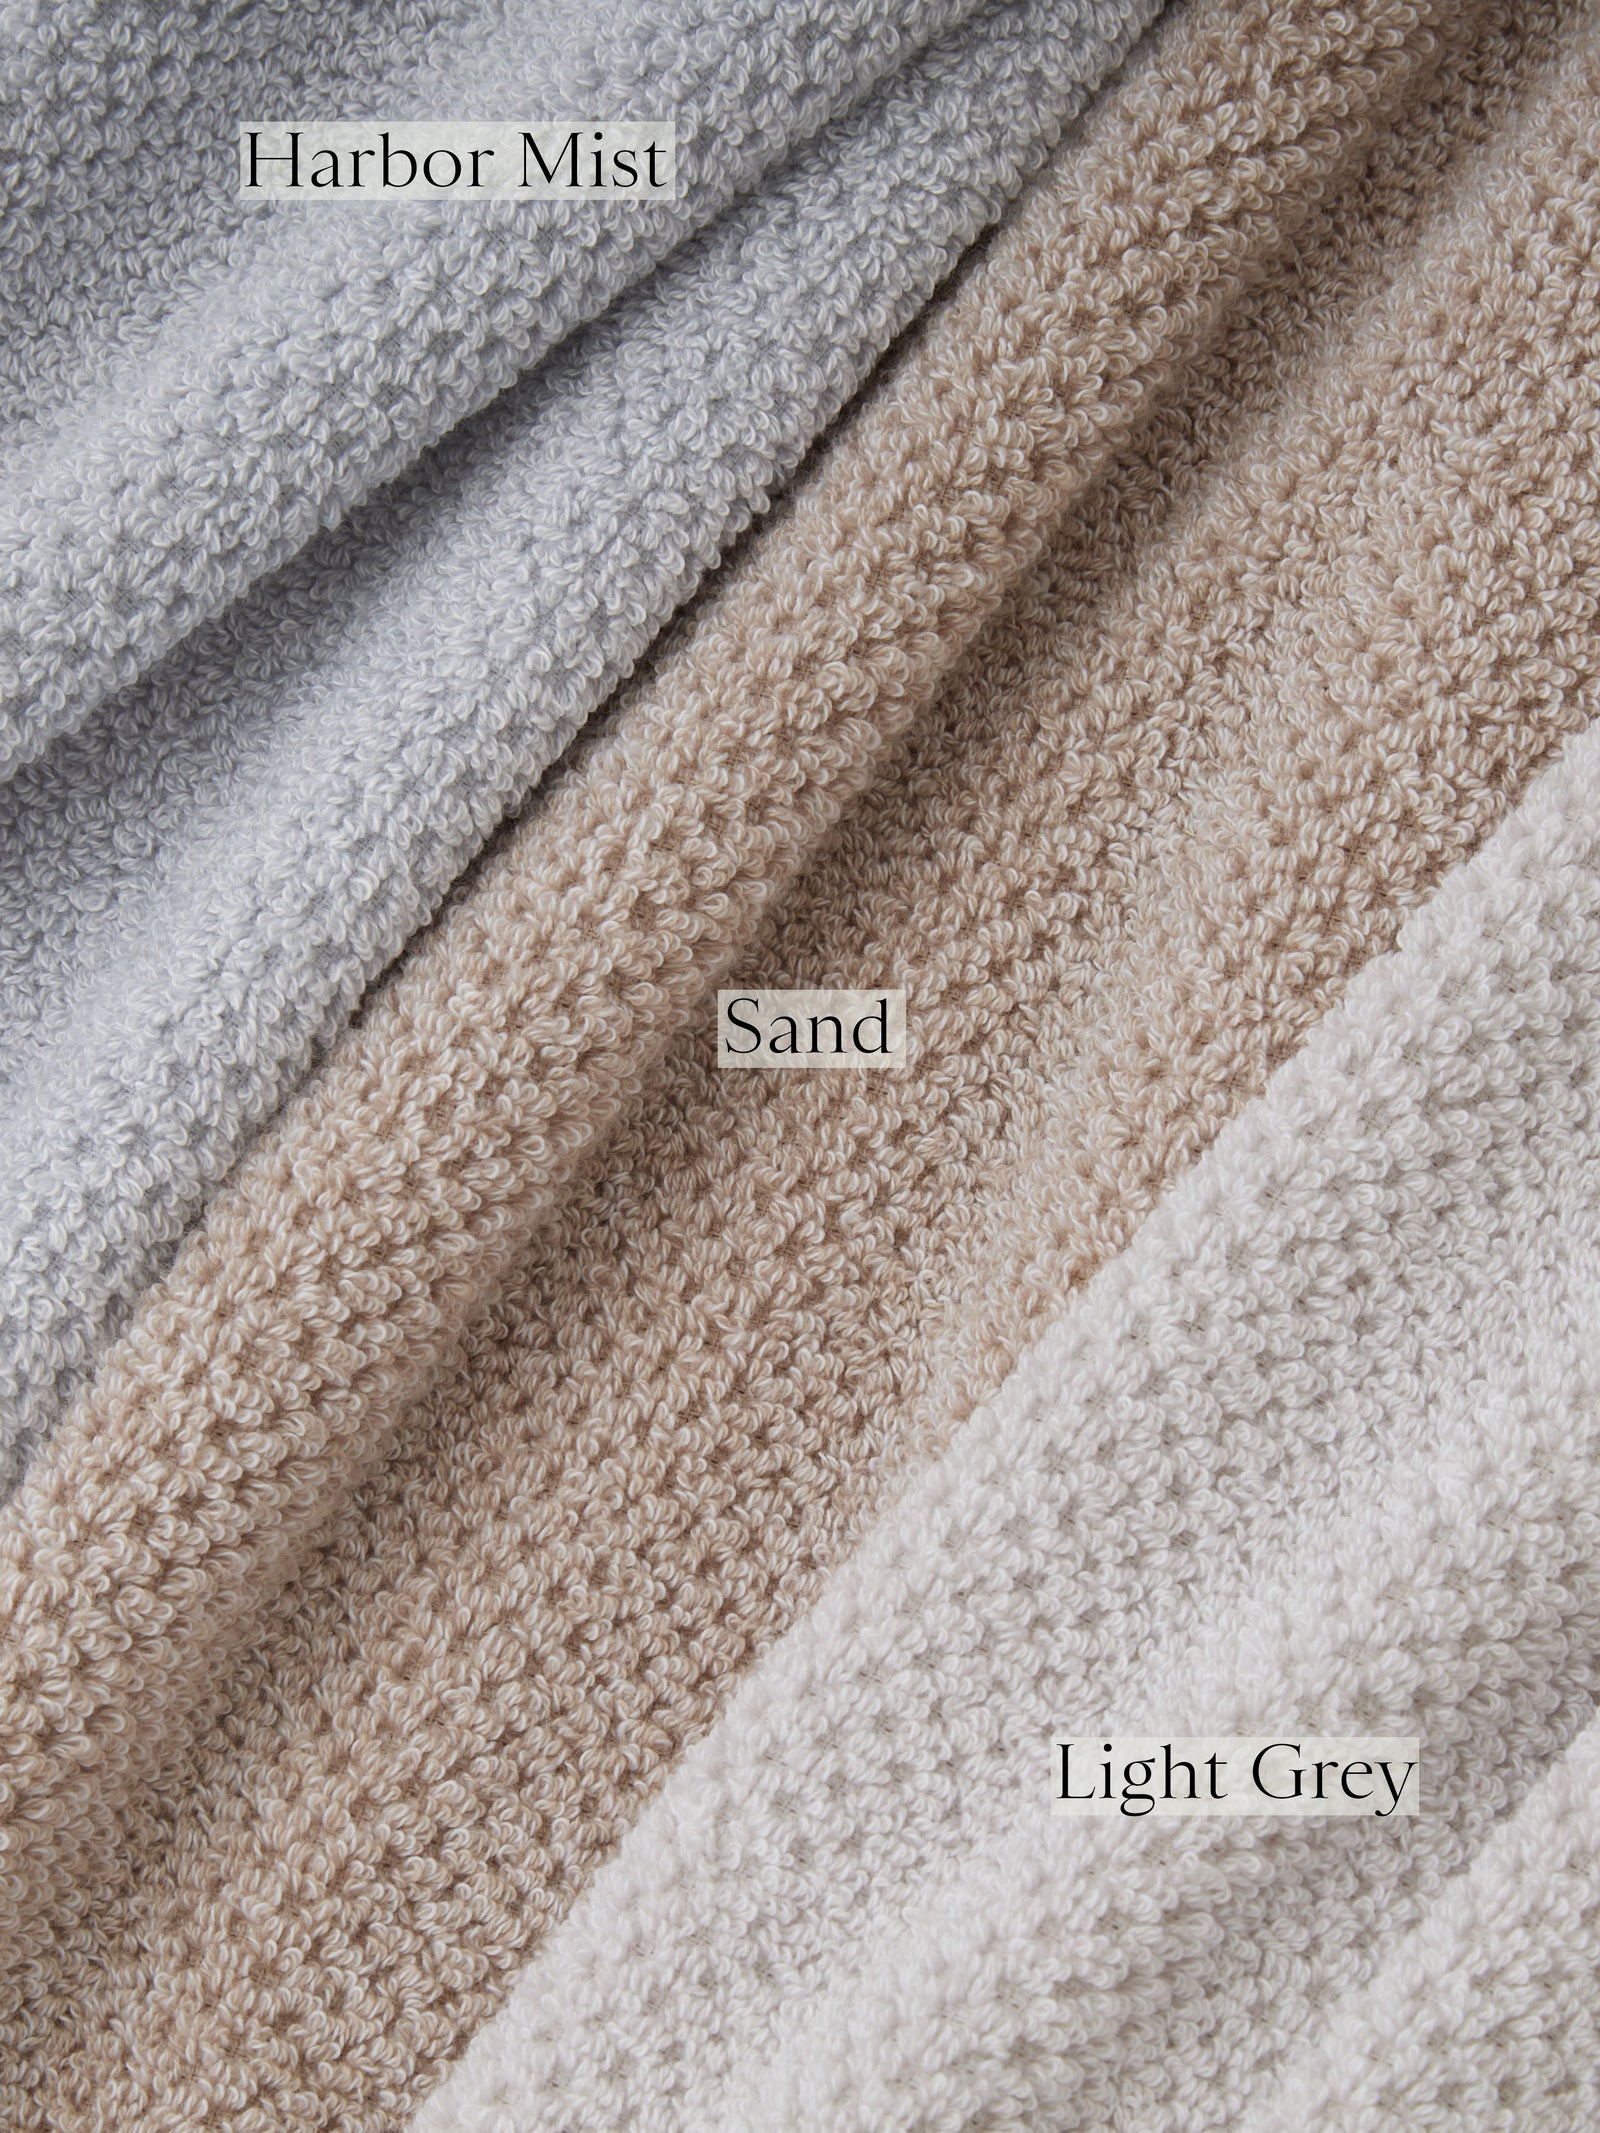 Nantucket Bath Towels in the colors Heathered Light Grey, Heathered Sand, and Heathered Harbor Mist. Photo of Nantucket Bath Towels taken as a close up of the towels. Only the towels can be seen.